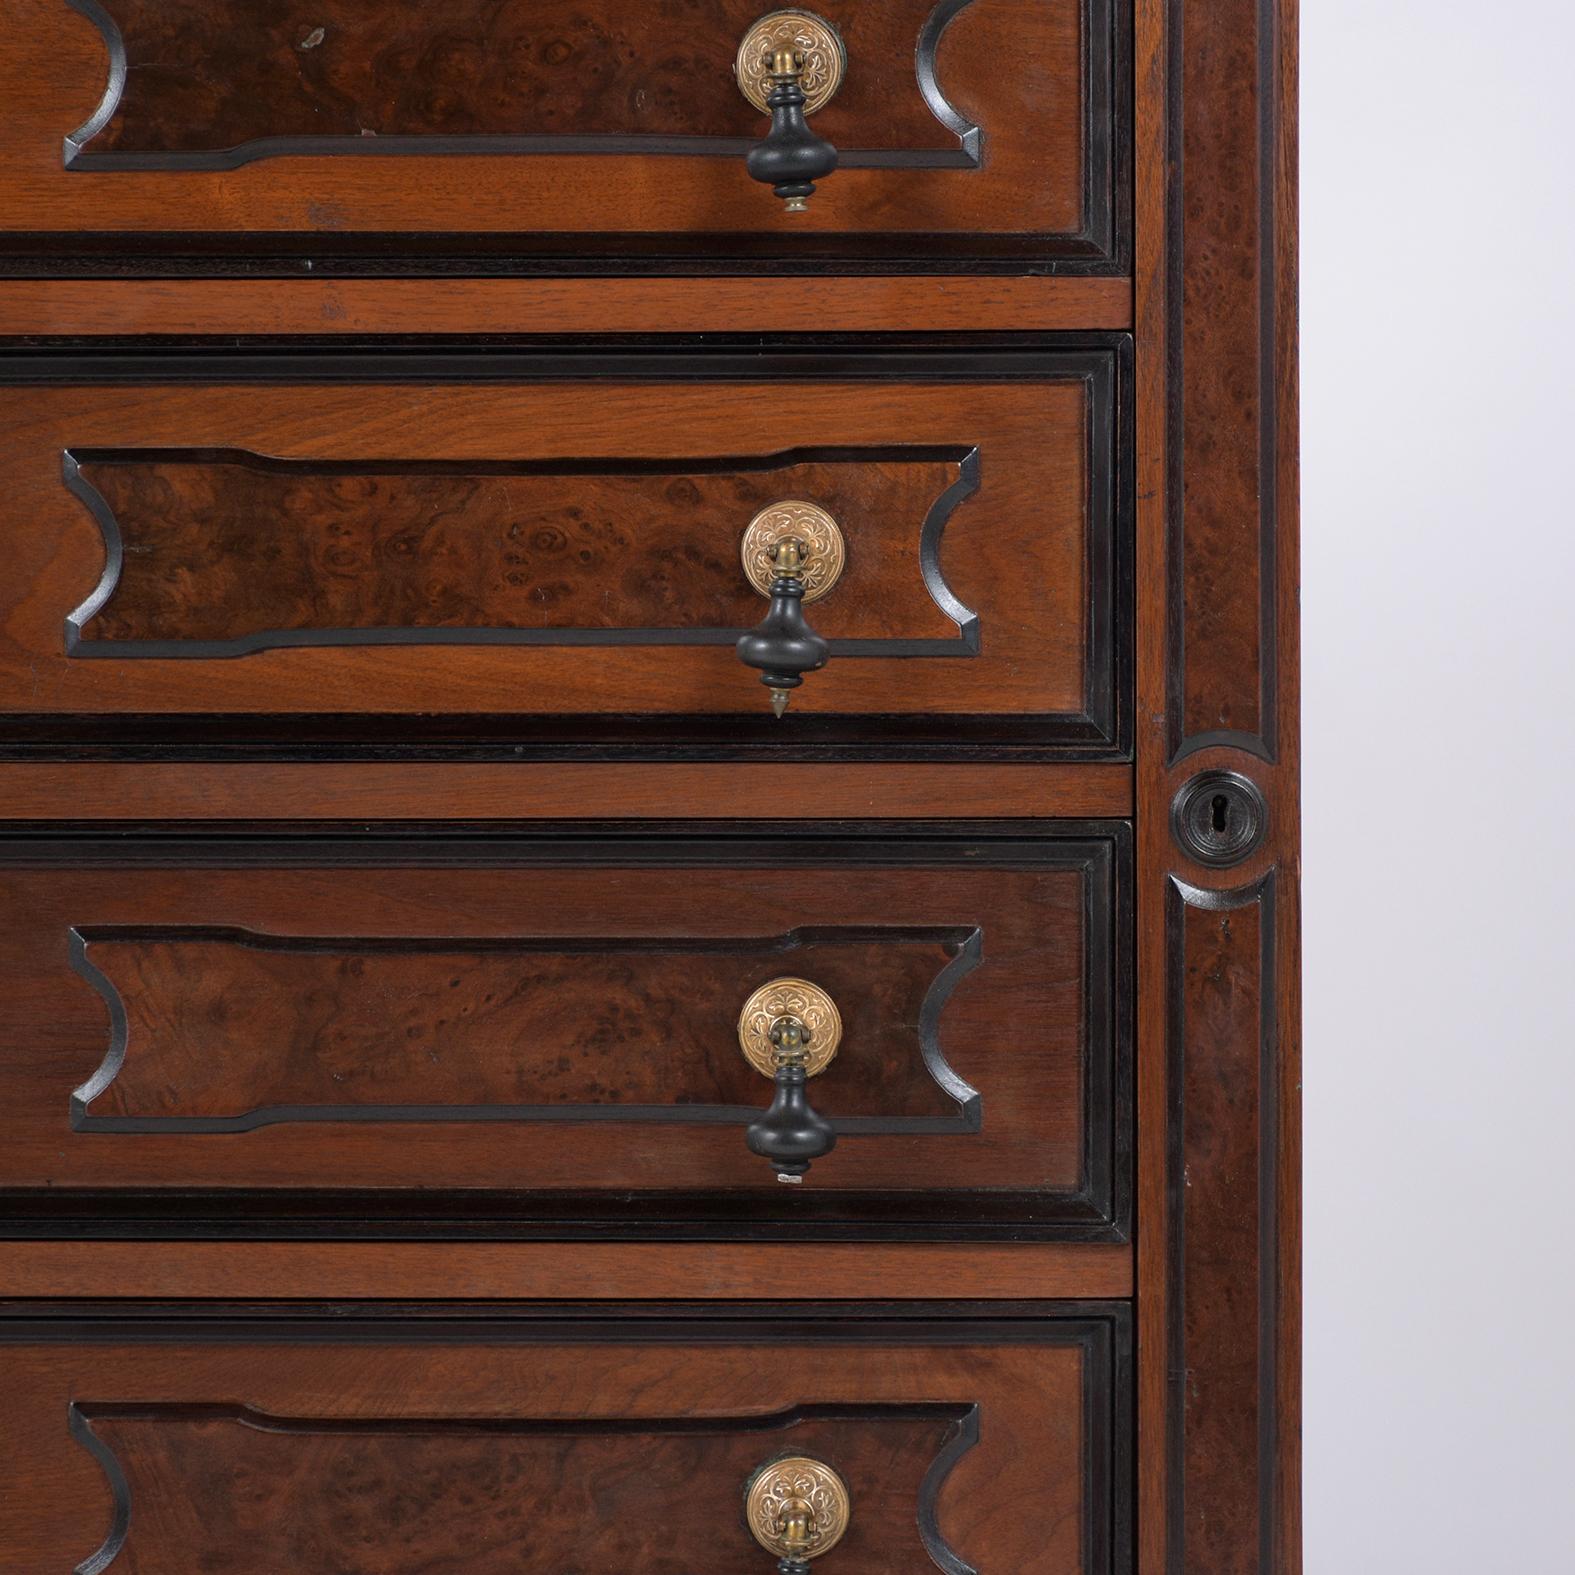 American Antique Empire Style Chest of Drawers